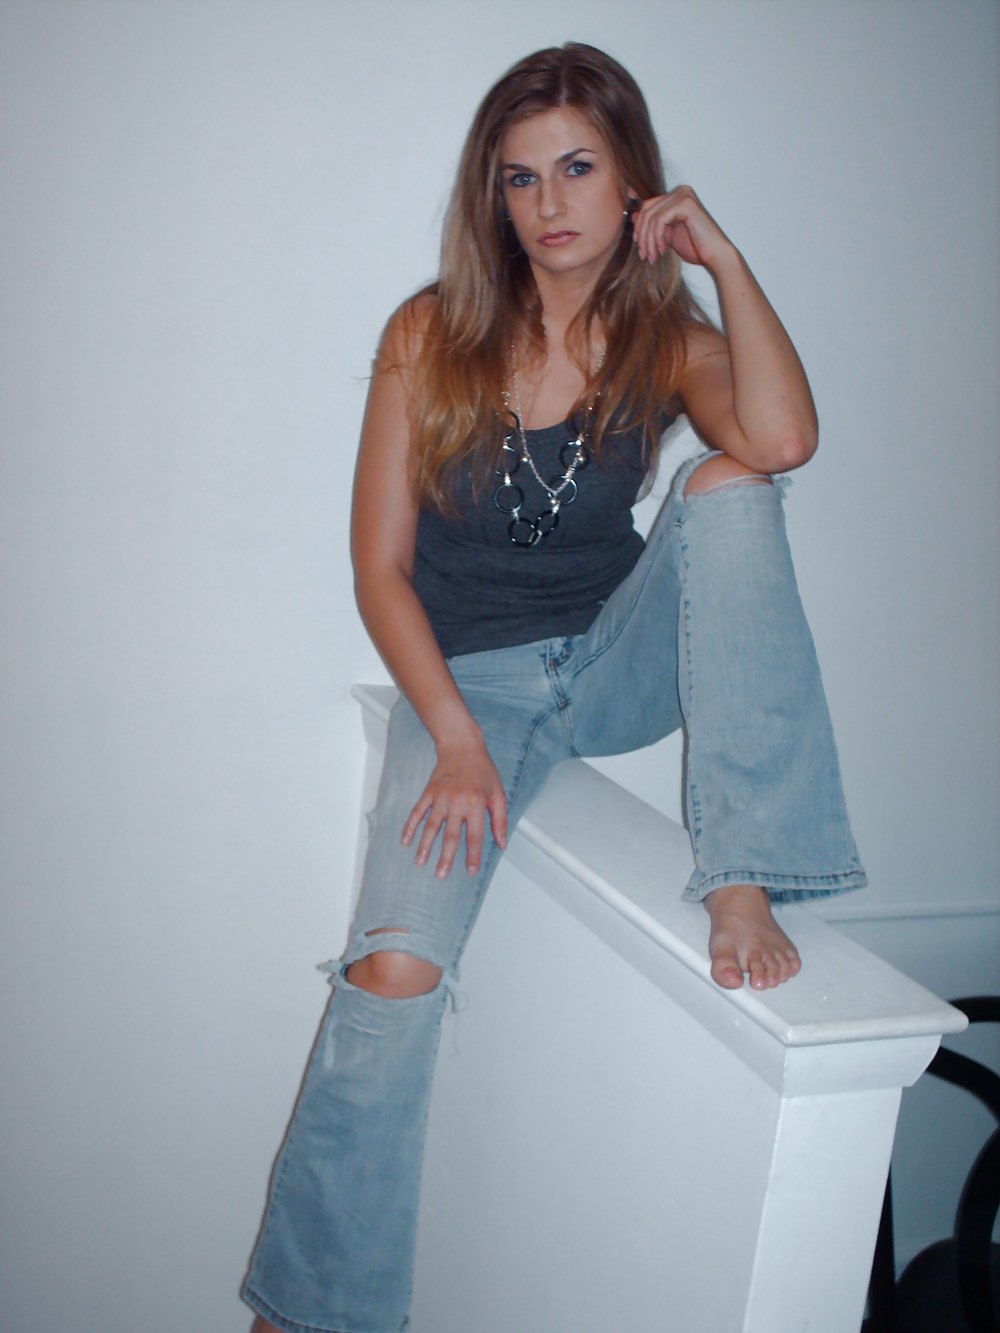 Sex Gallery Amanda Ripped Jeans & Barefoot # 1